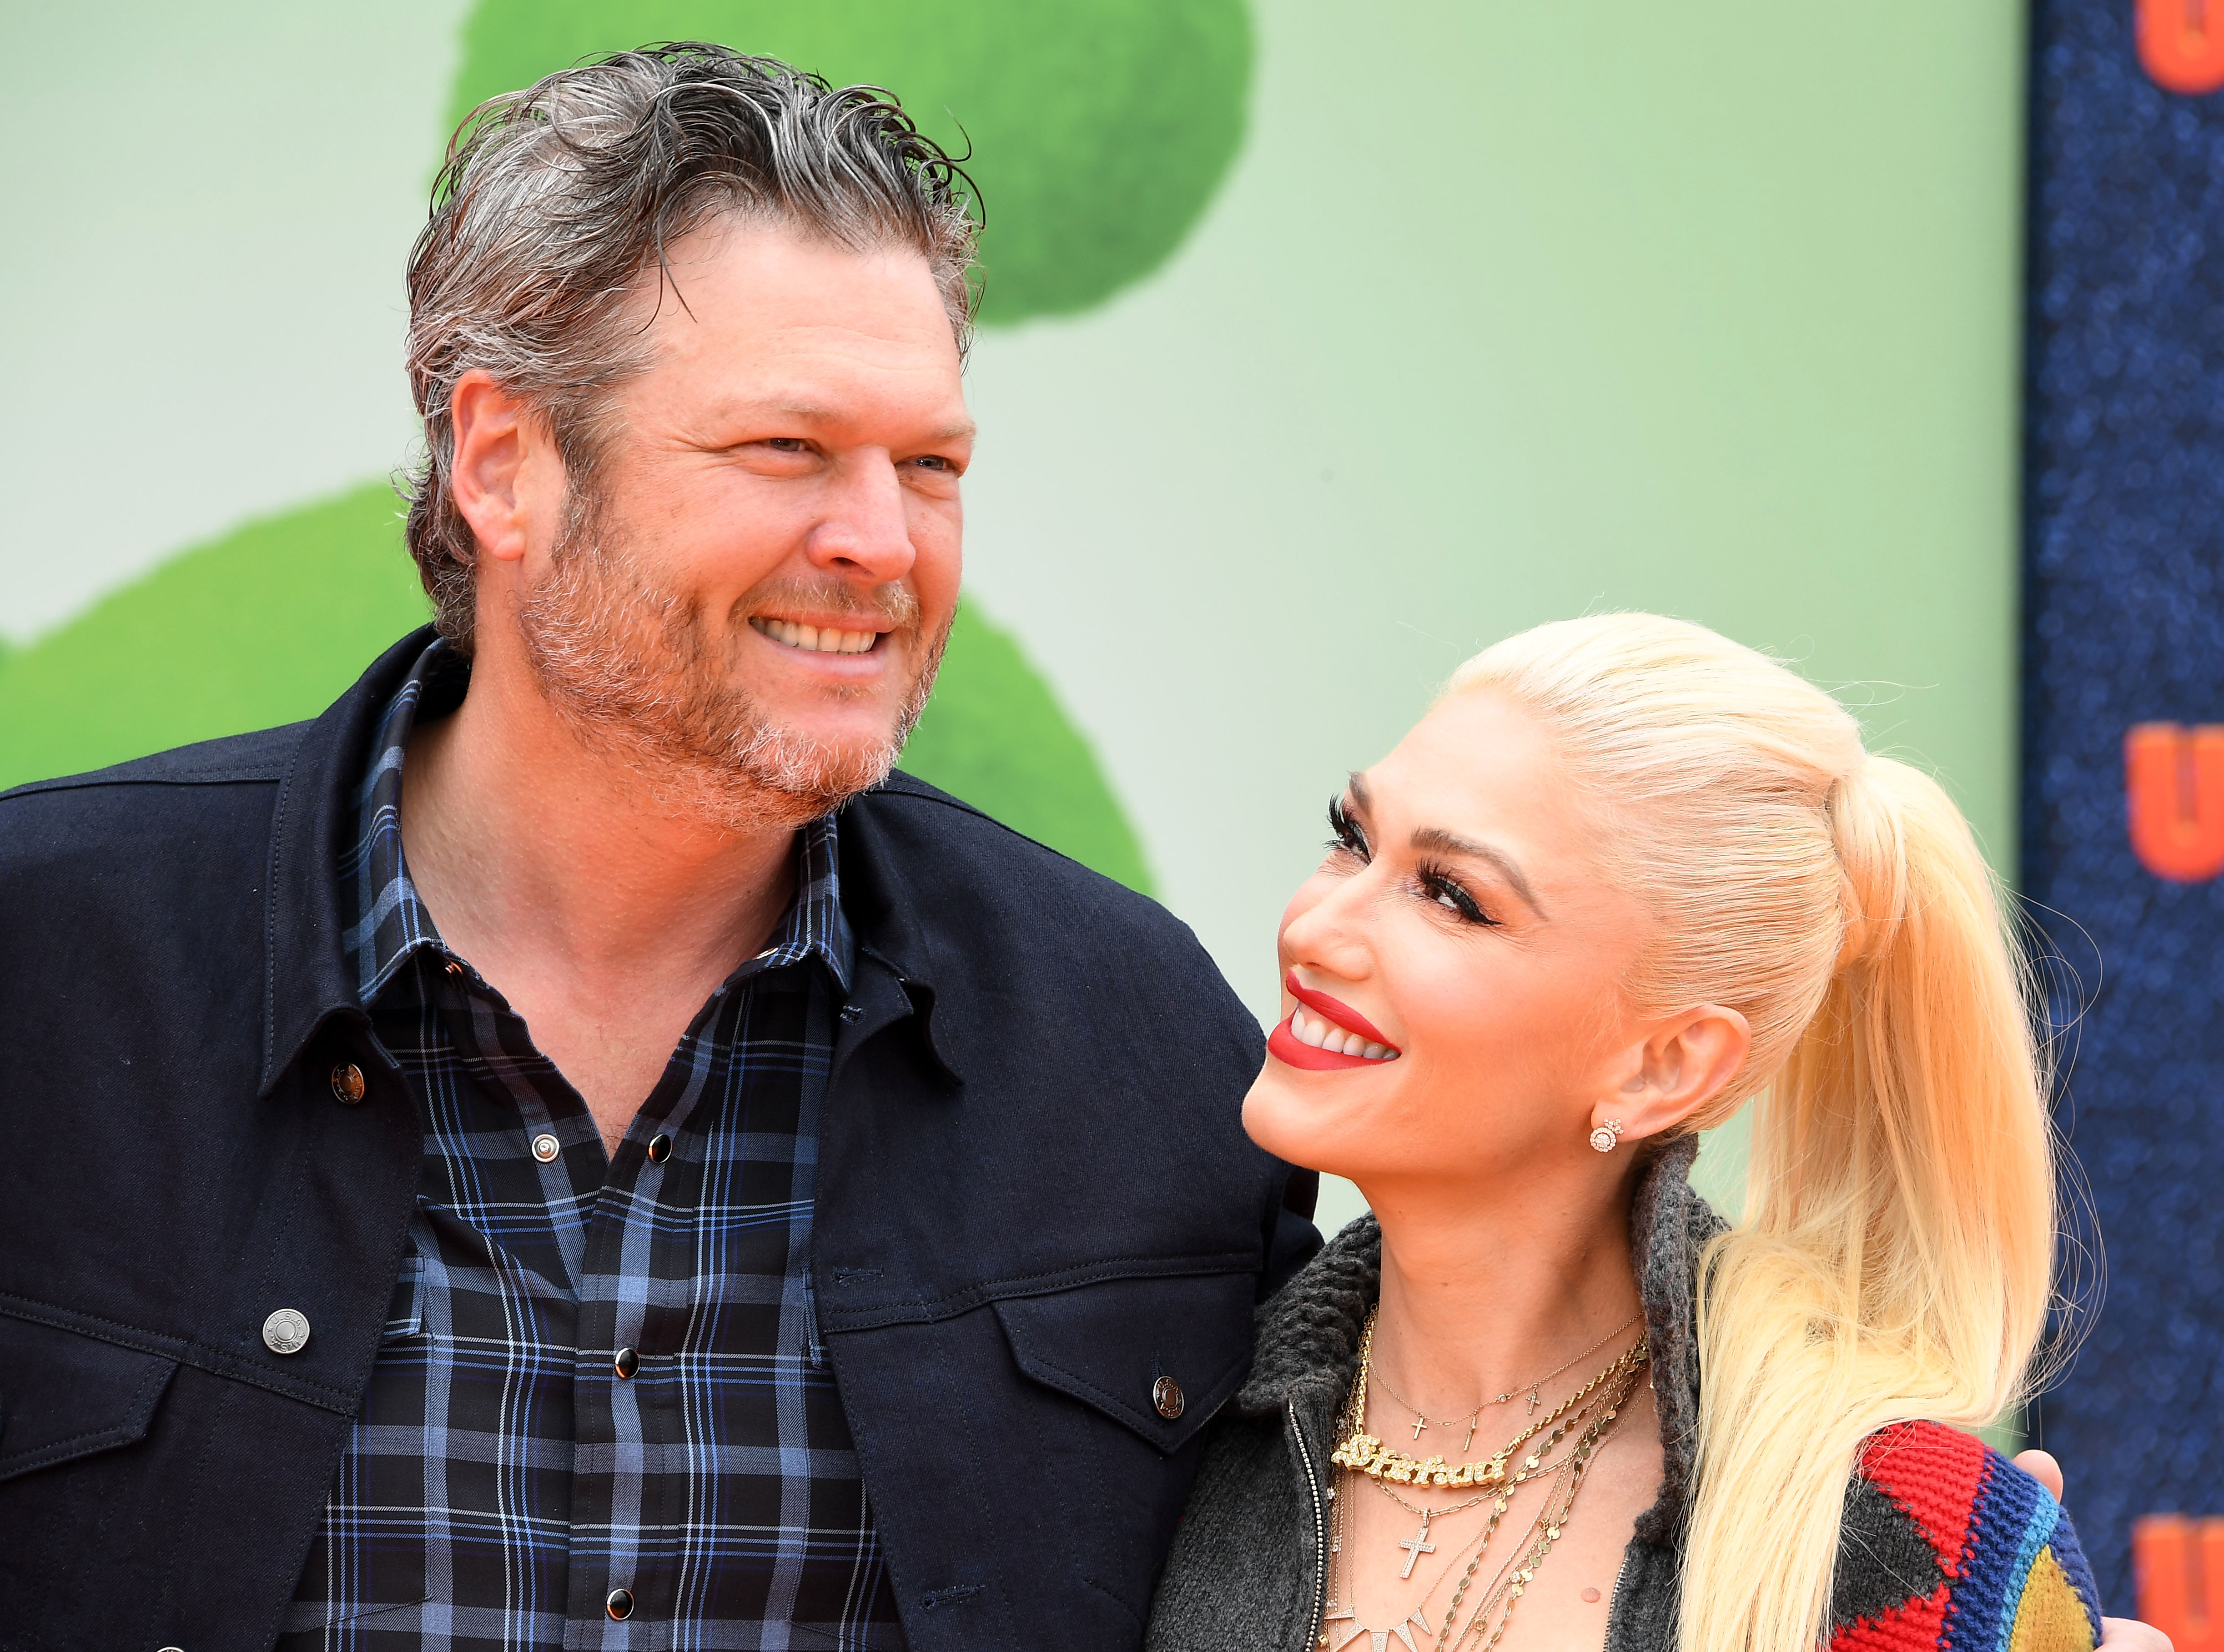 Gwen shut down divorce rumors by announcing the couple had a new love song coming out soon